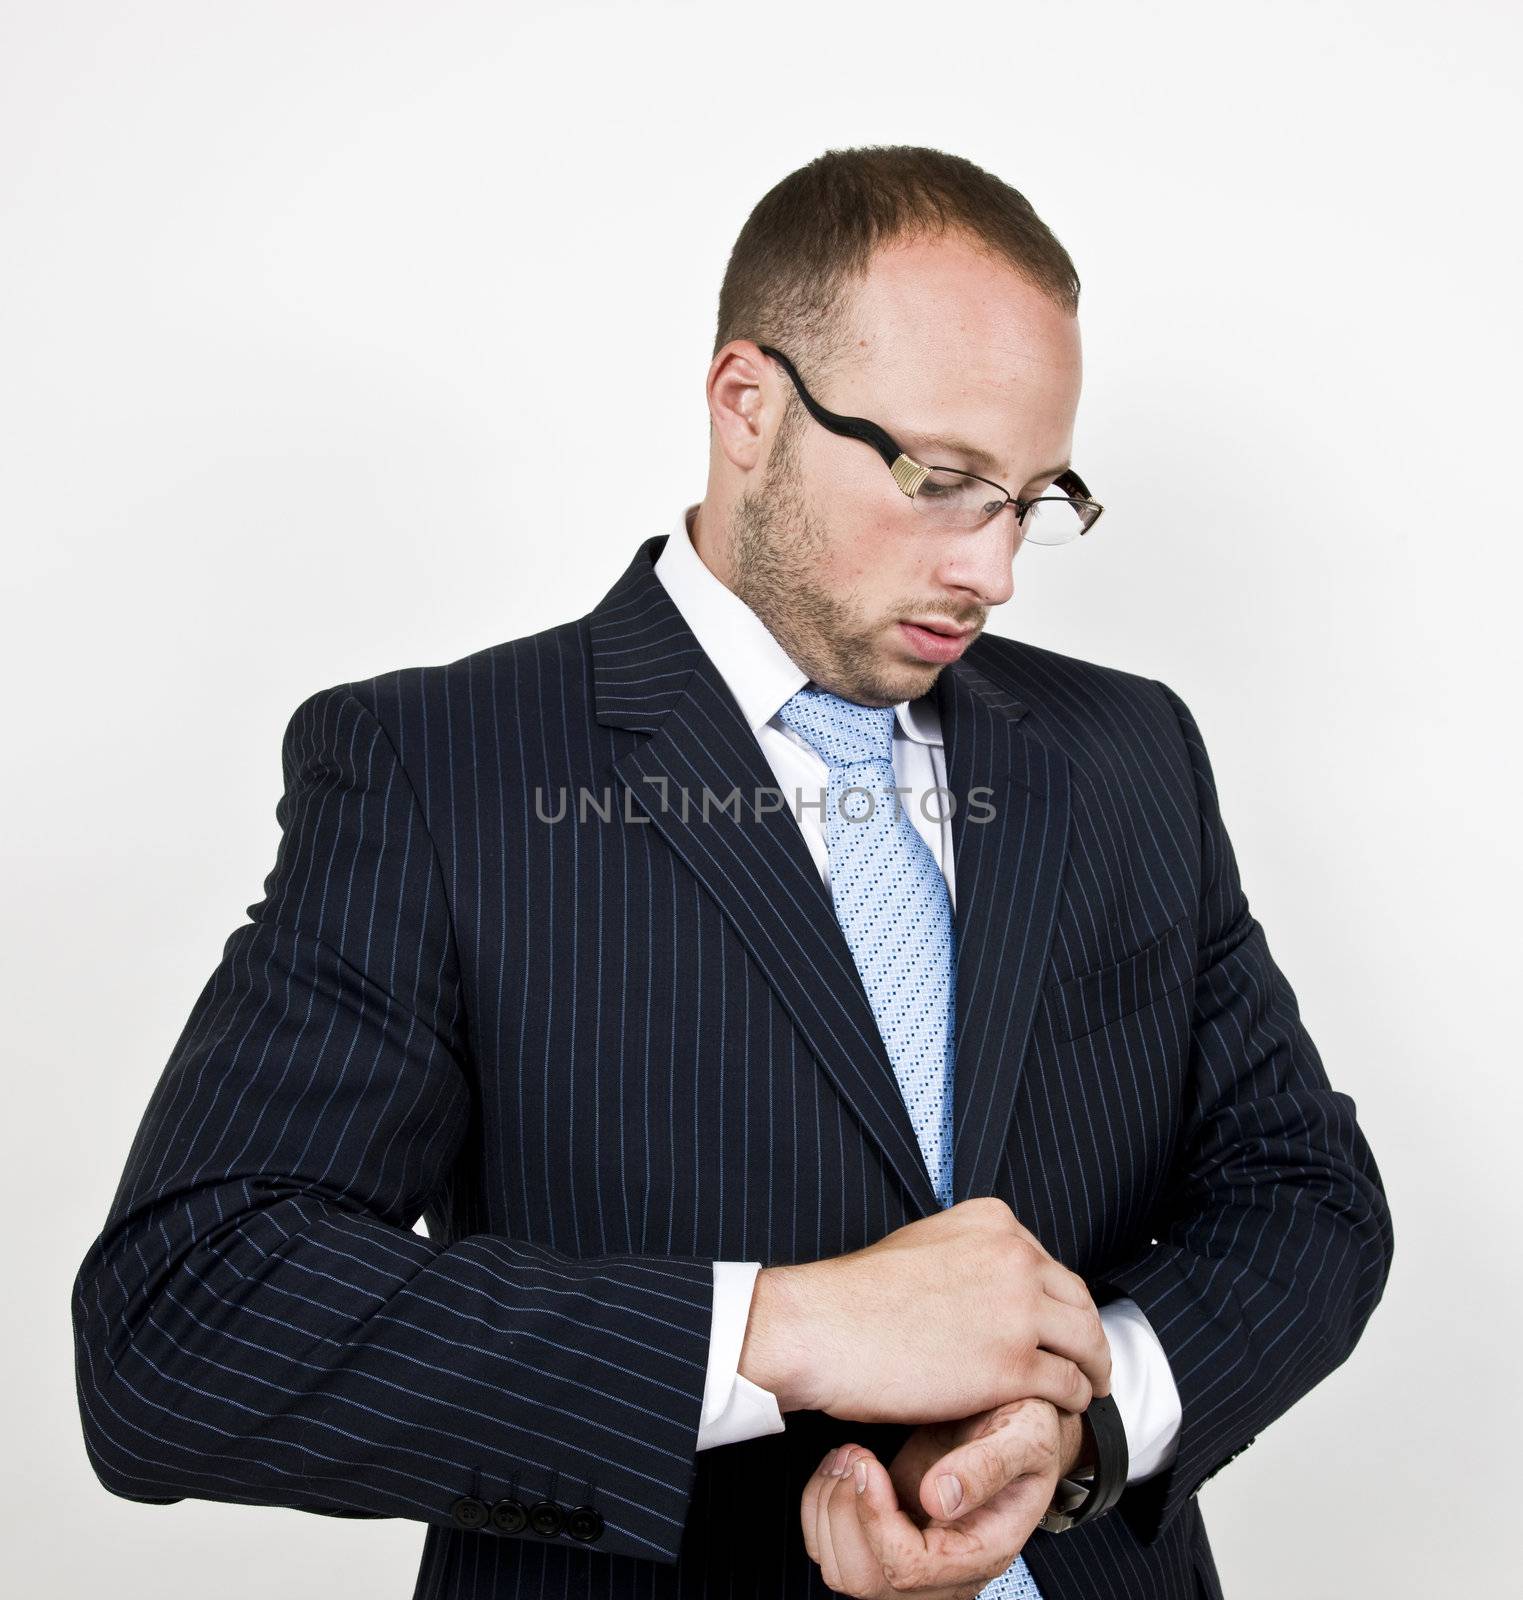 businessman wearing the watch on isolated background

